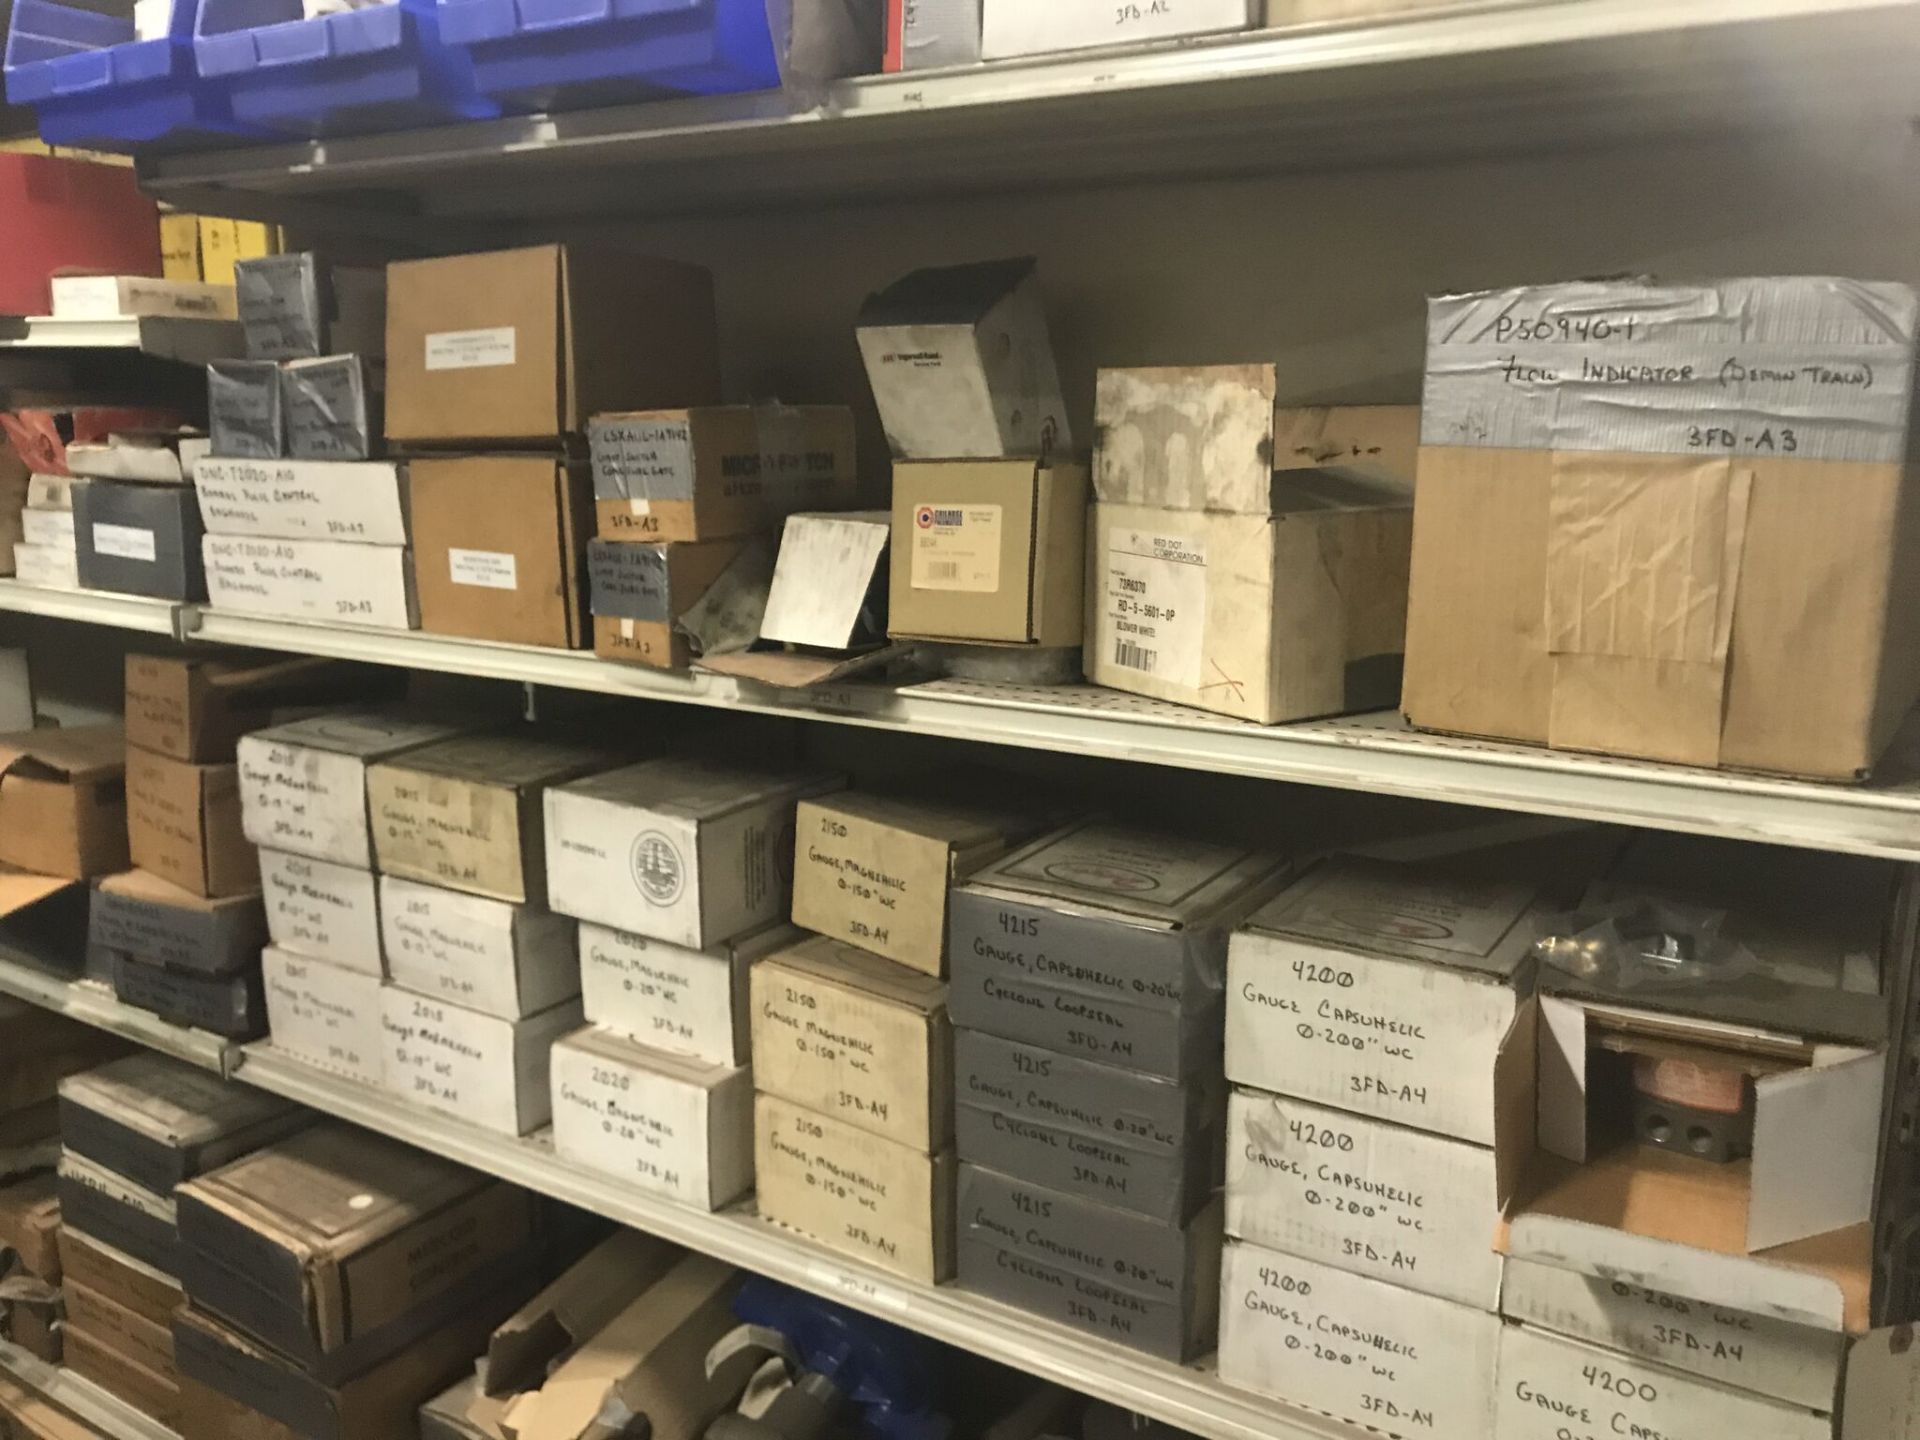 Shelving w/ Brakes, Motor Controllers, Electrical Components thermocouples, Thermoneters, Switches - Image 9 of 13